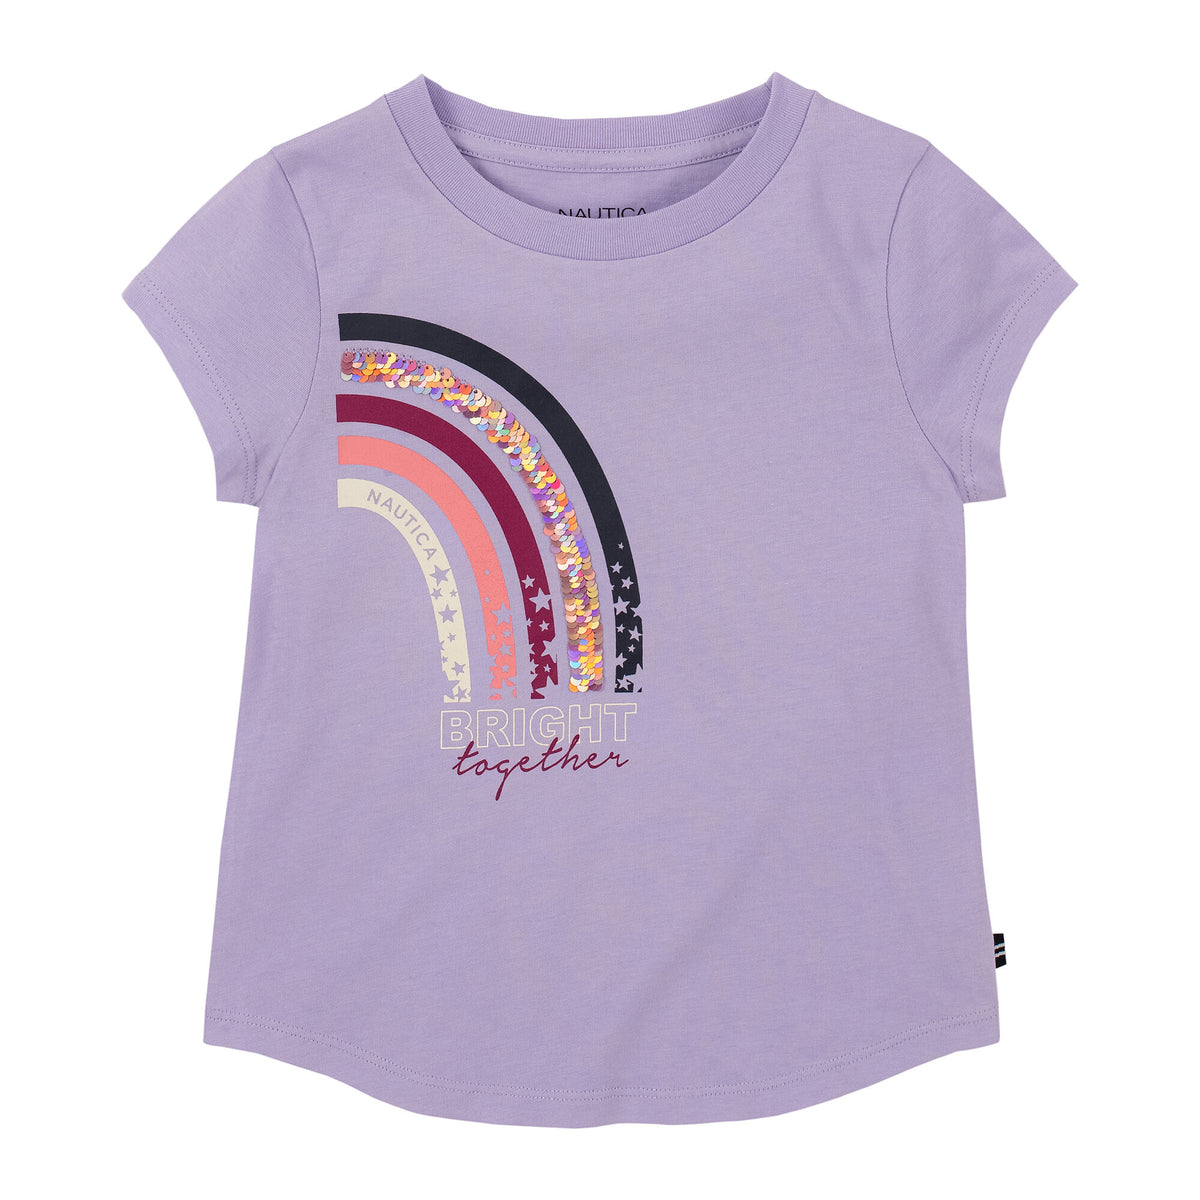 Nautica Toddler Girls' Bright Together T-Shirt (2T-4T) Thistle